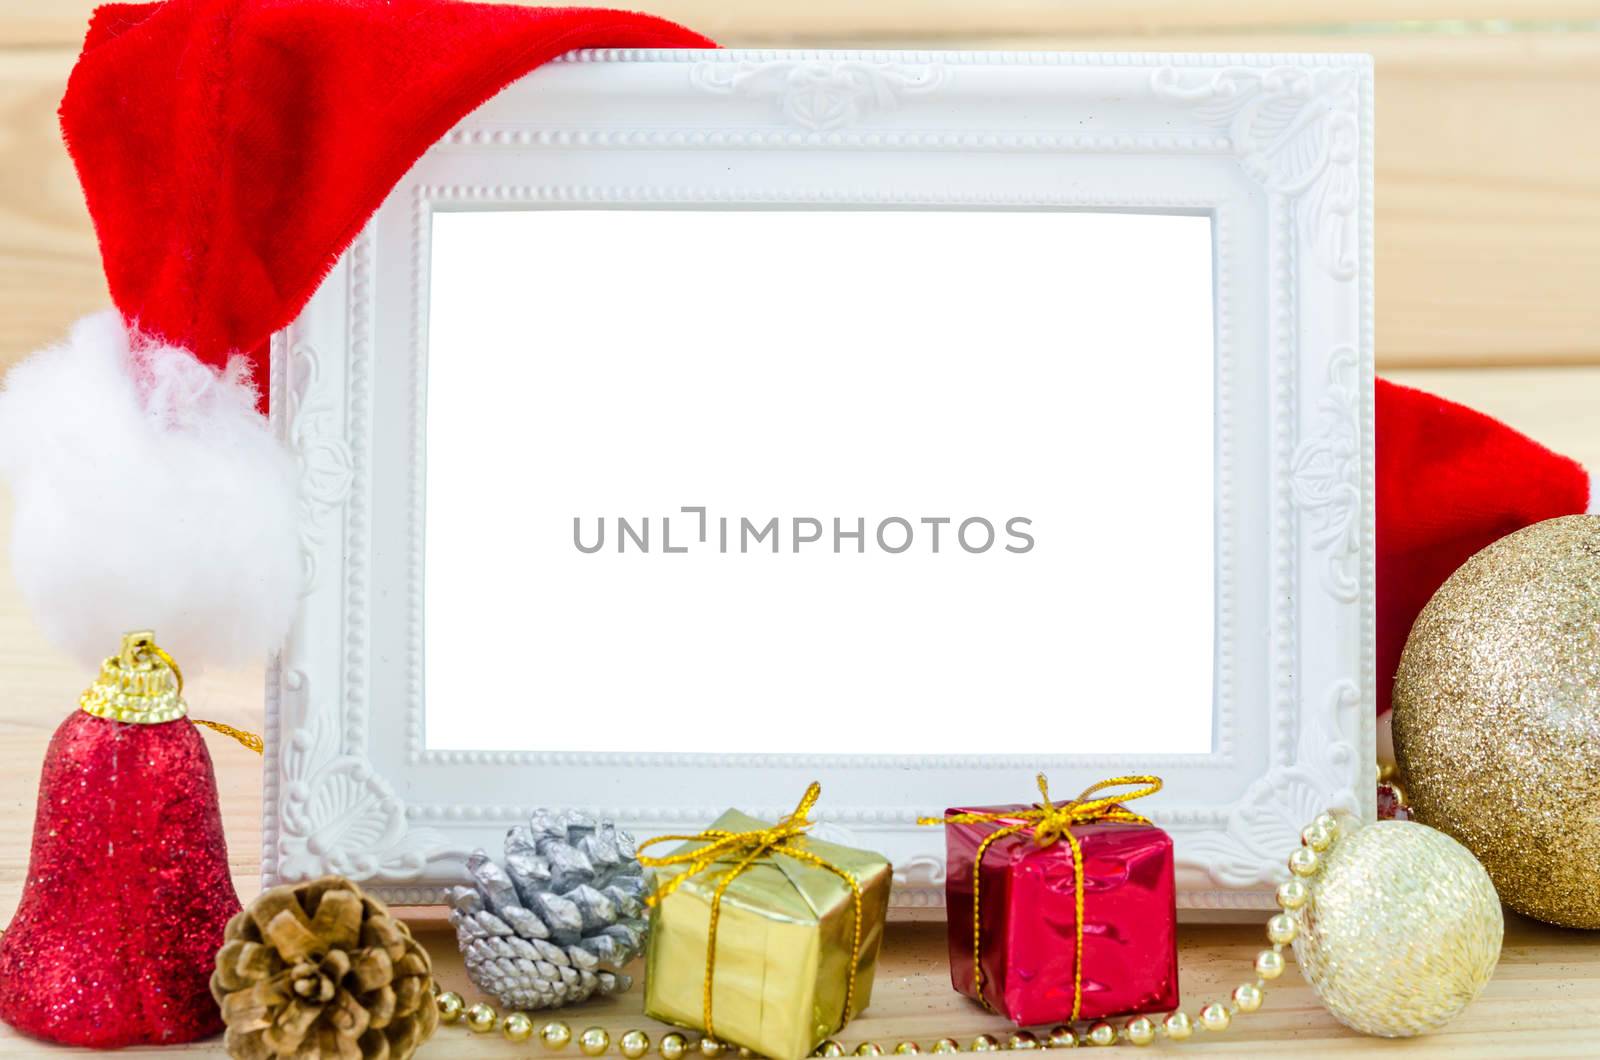 Vintage photo frame and christmas decorations on wood background. Save clipping path.